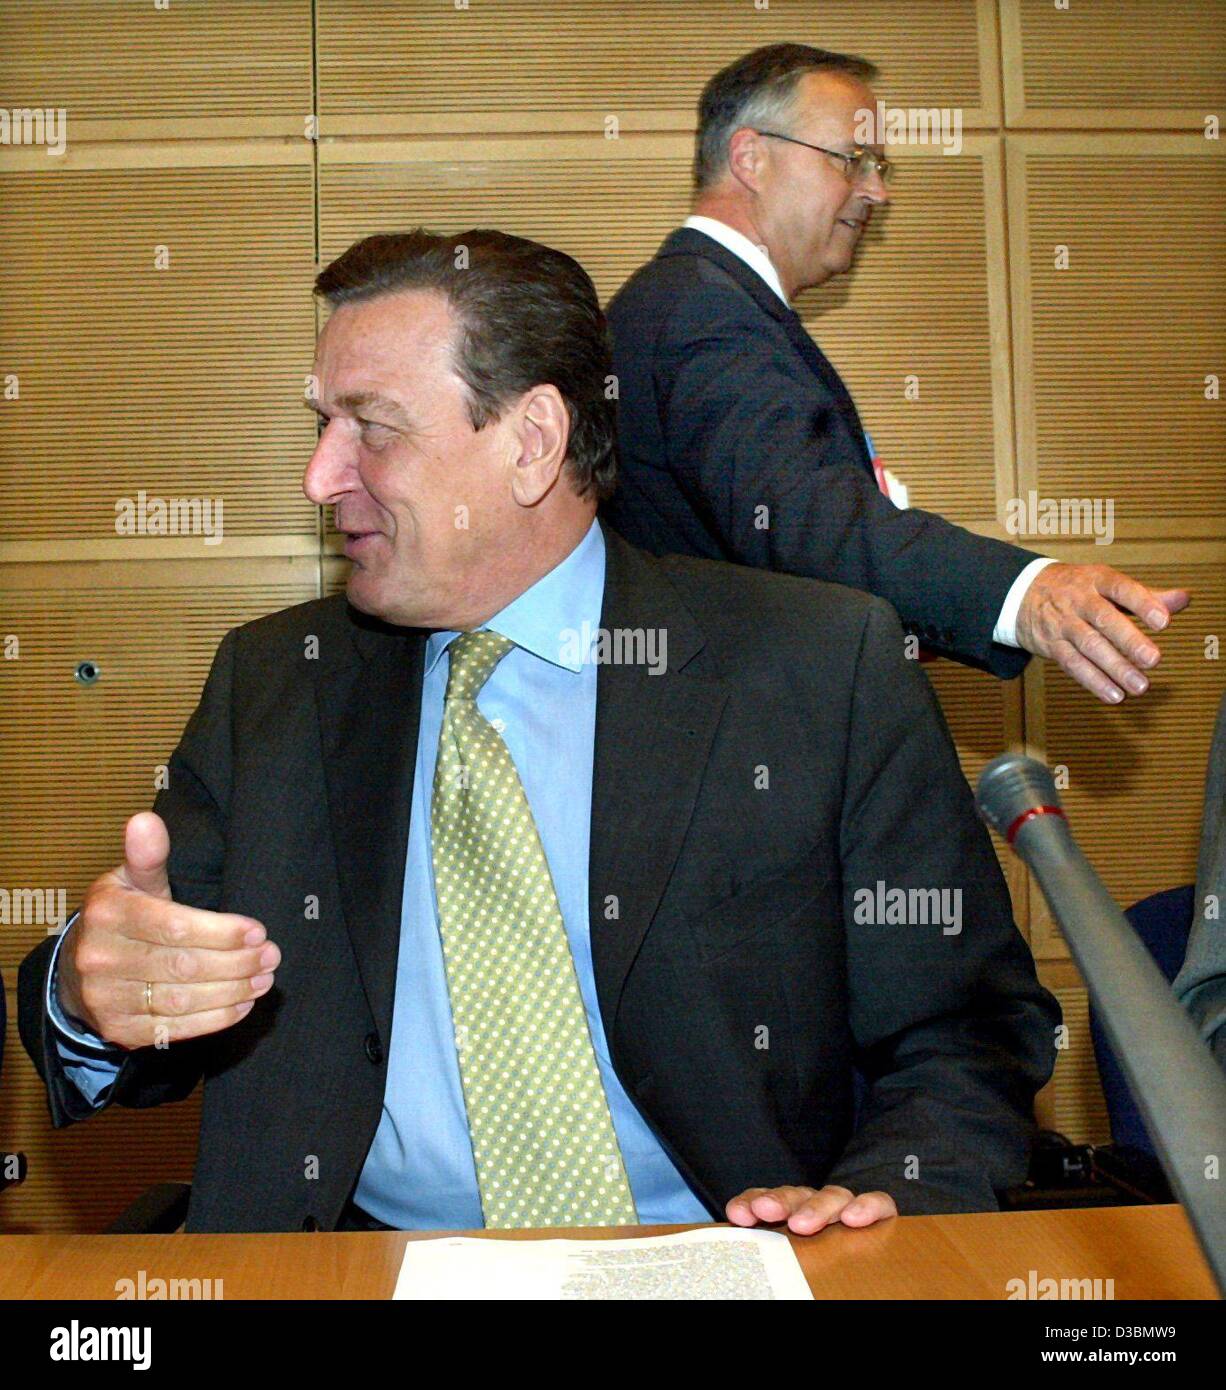 (dpa) - German Finance Minister Hans Eichel in the background walks past German Chancellor Gerhard Schroeder who is laughing during a conversation, ahead of an SPD party meeting in Berlin, 19 May 2003. Stock Photo